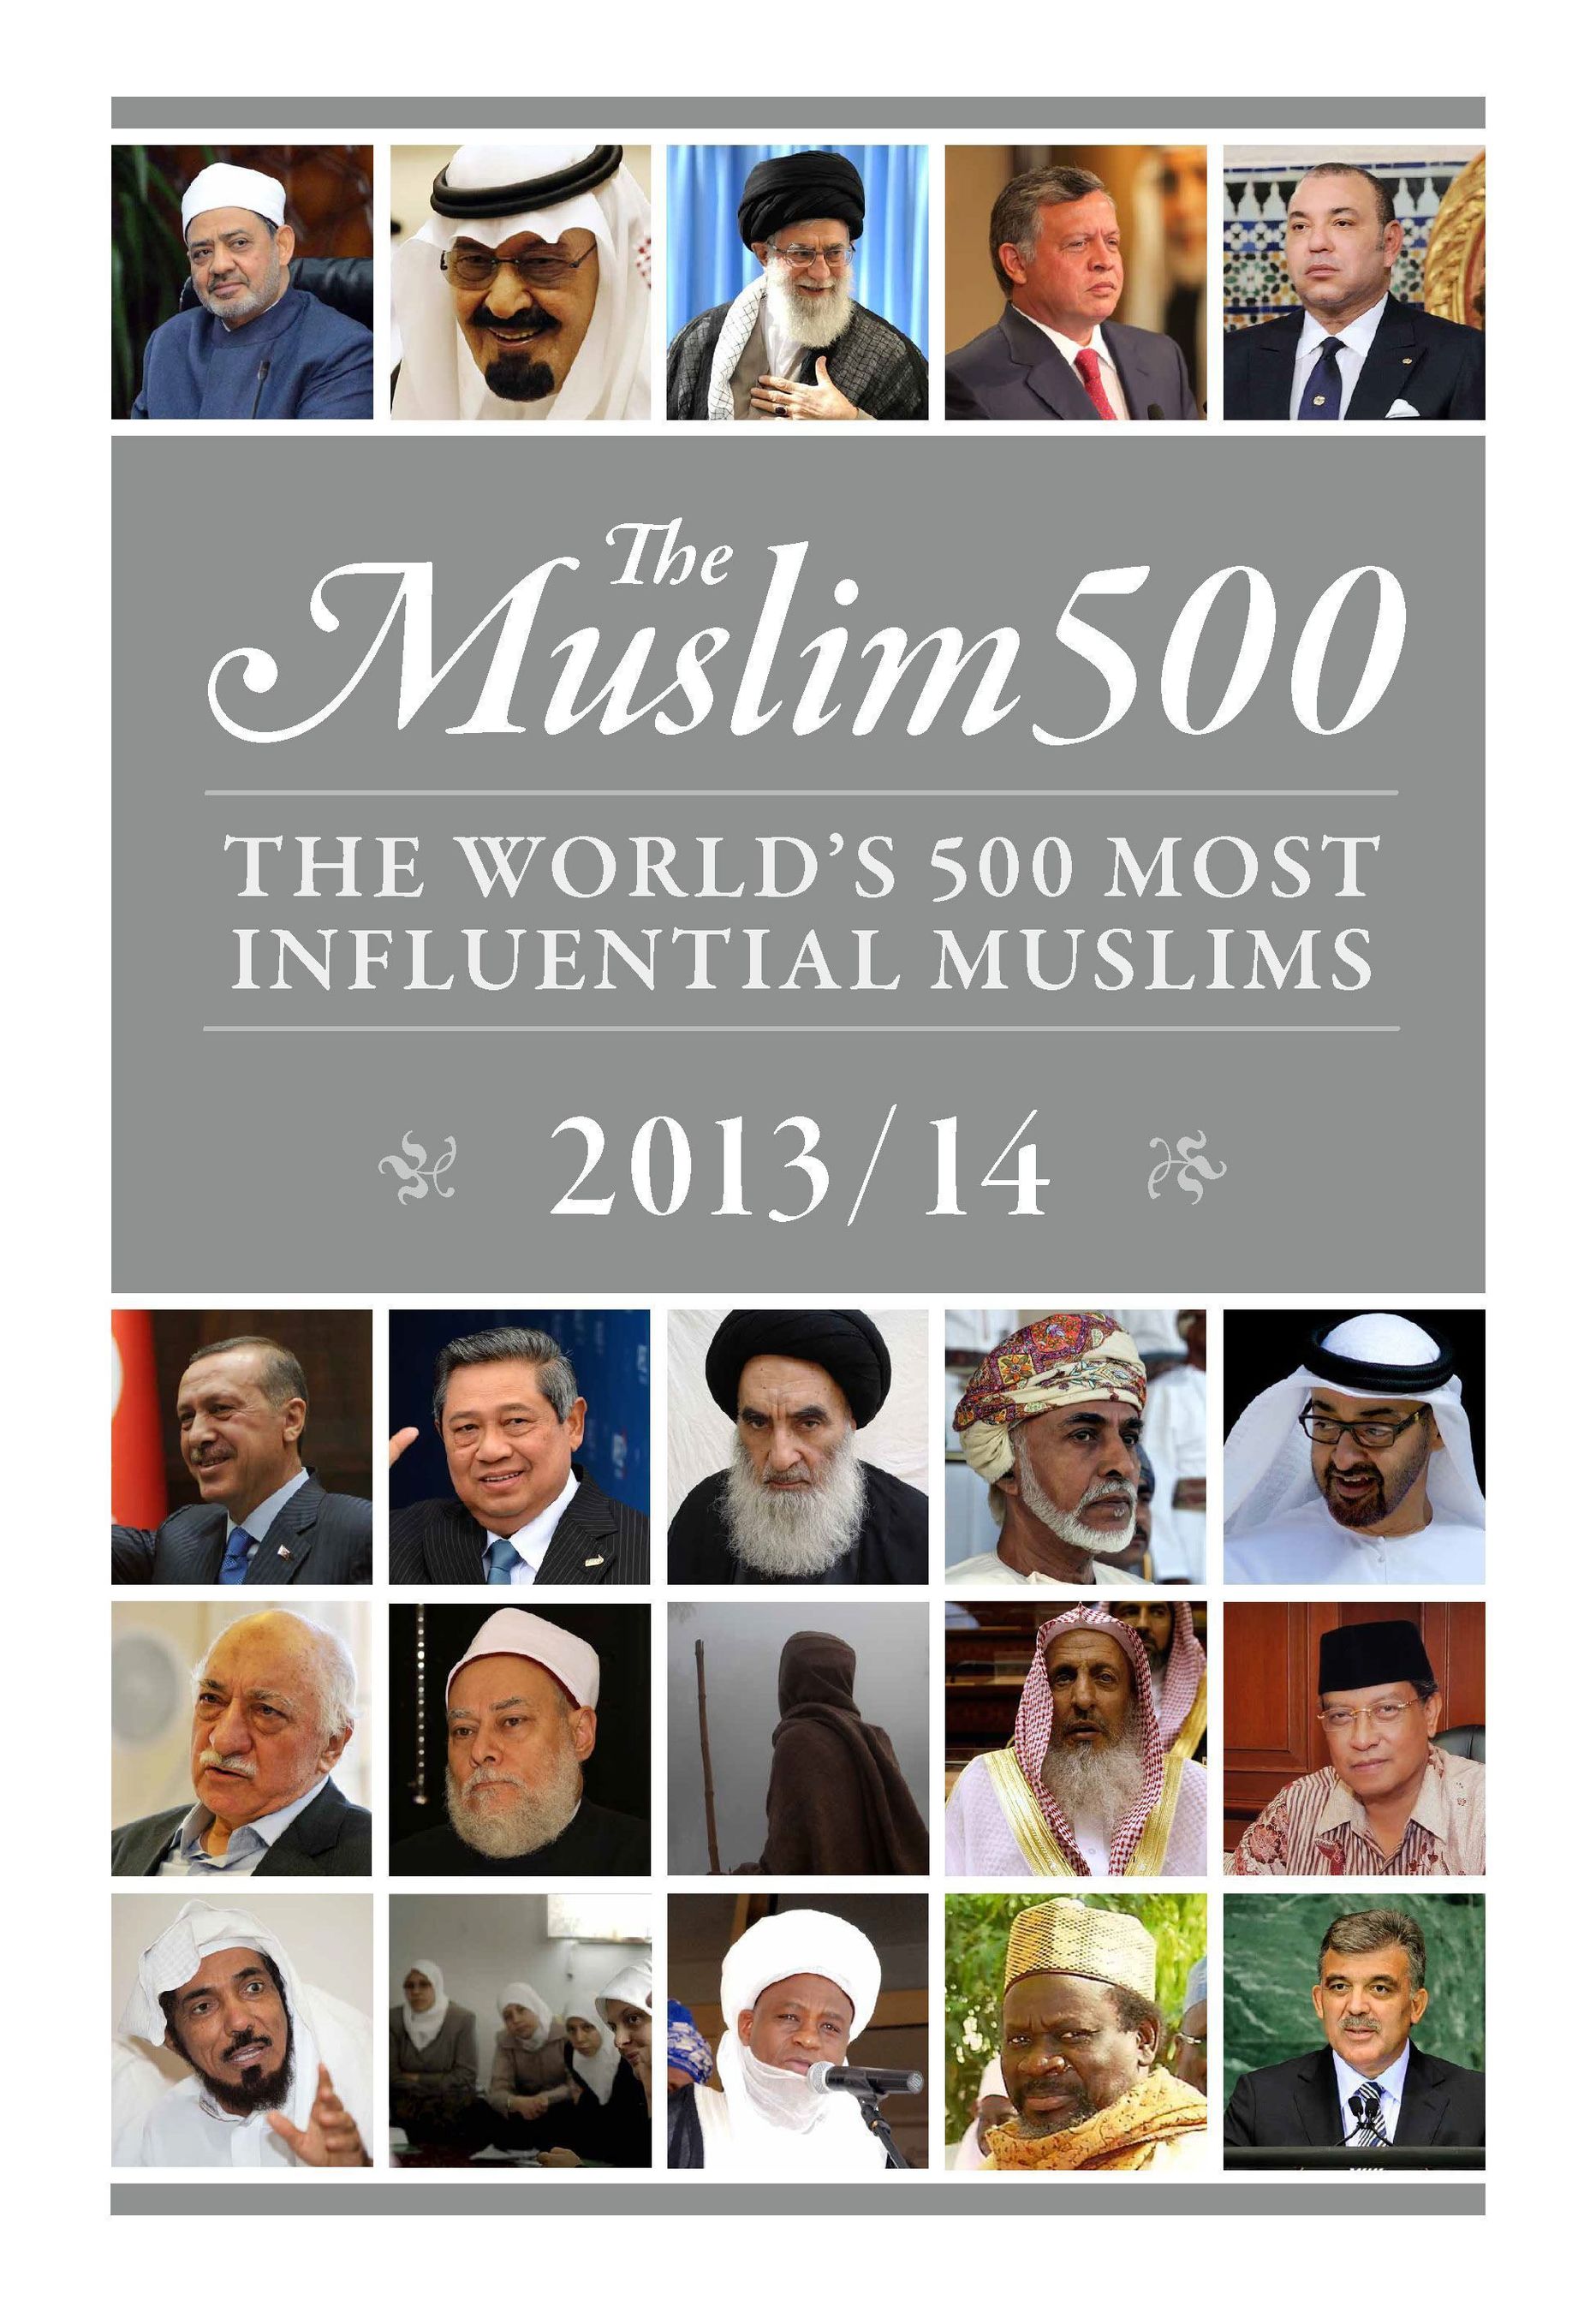 Cover of the 2013/14 Edition of the Muslim 500 (PRNewsFoto/RISSC)